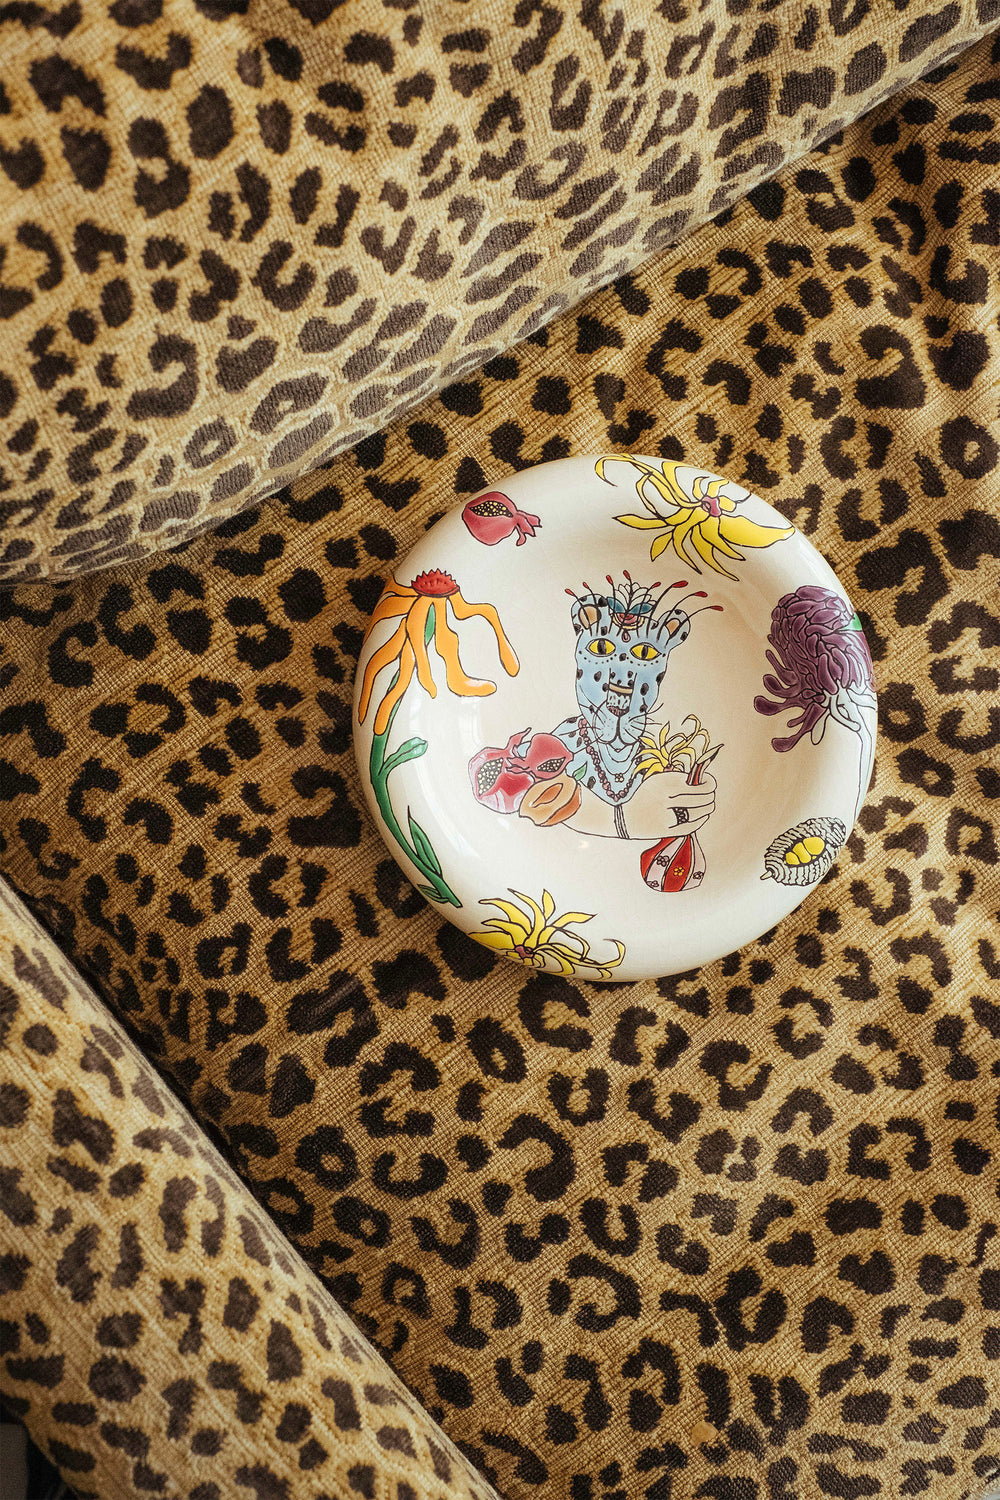 The "leopard at the table" ashtray